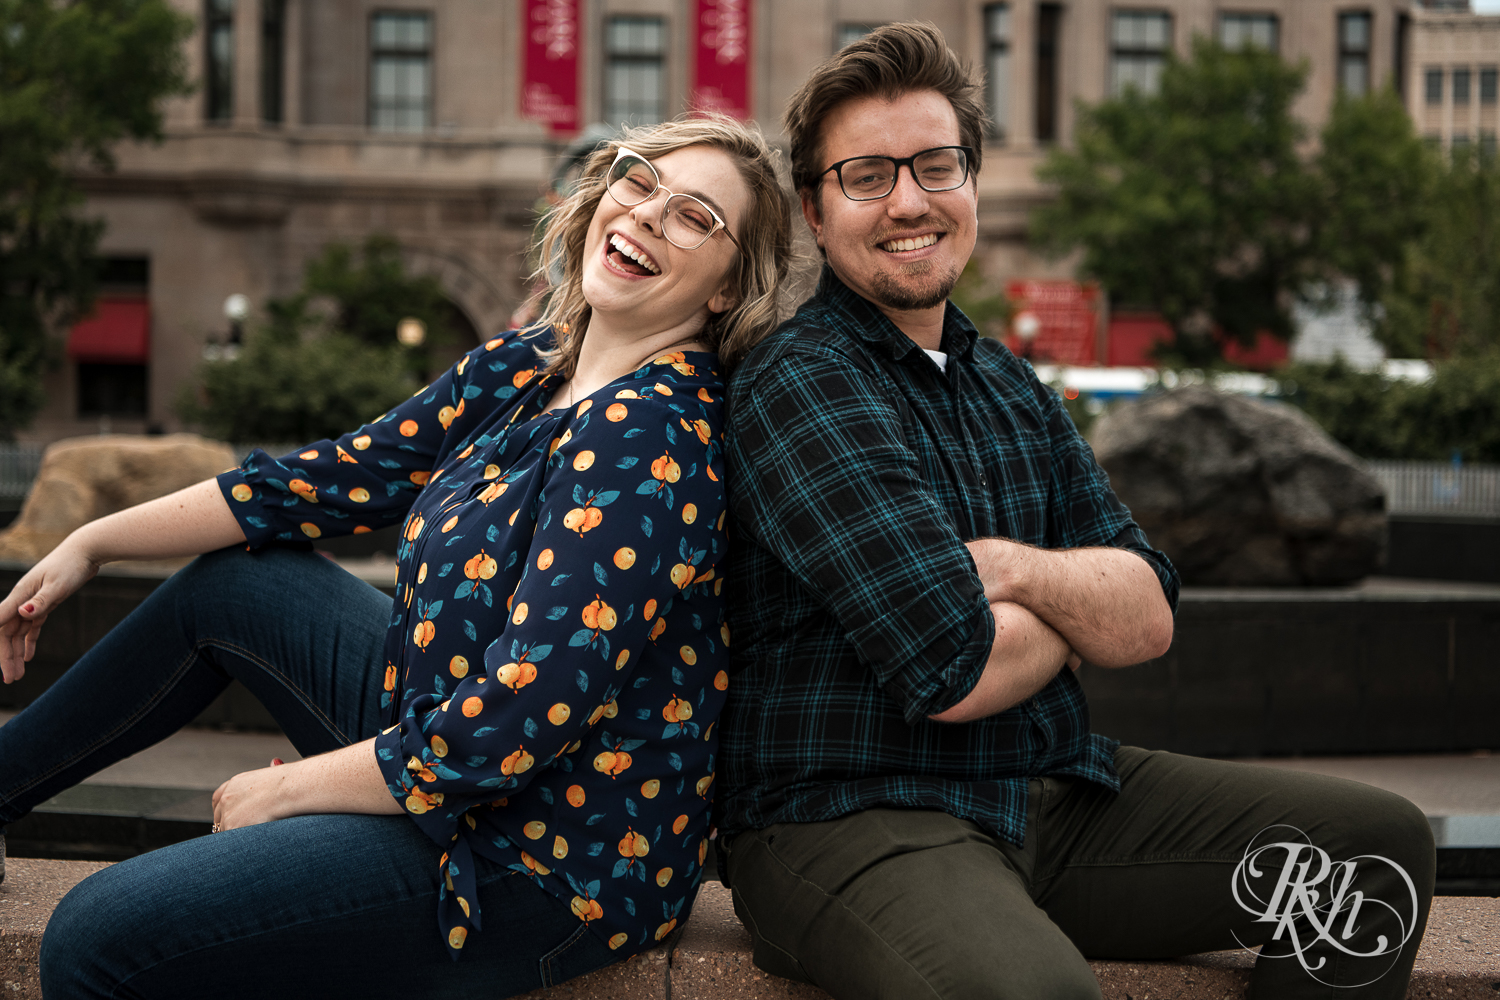 Blond woman with glasses and man with glasses laugh in Saint Paul, Minnesota.